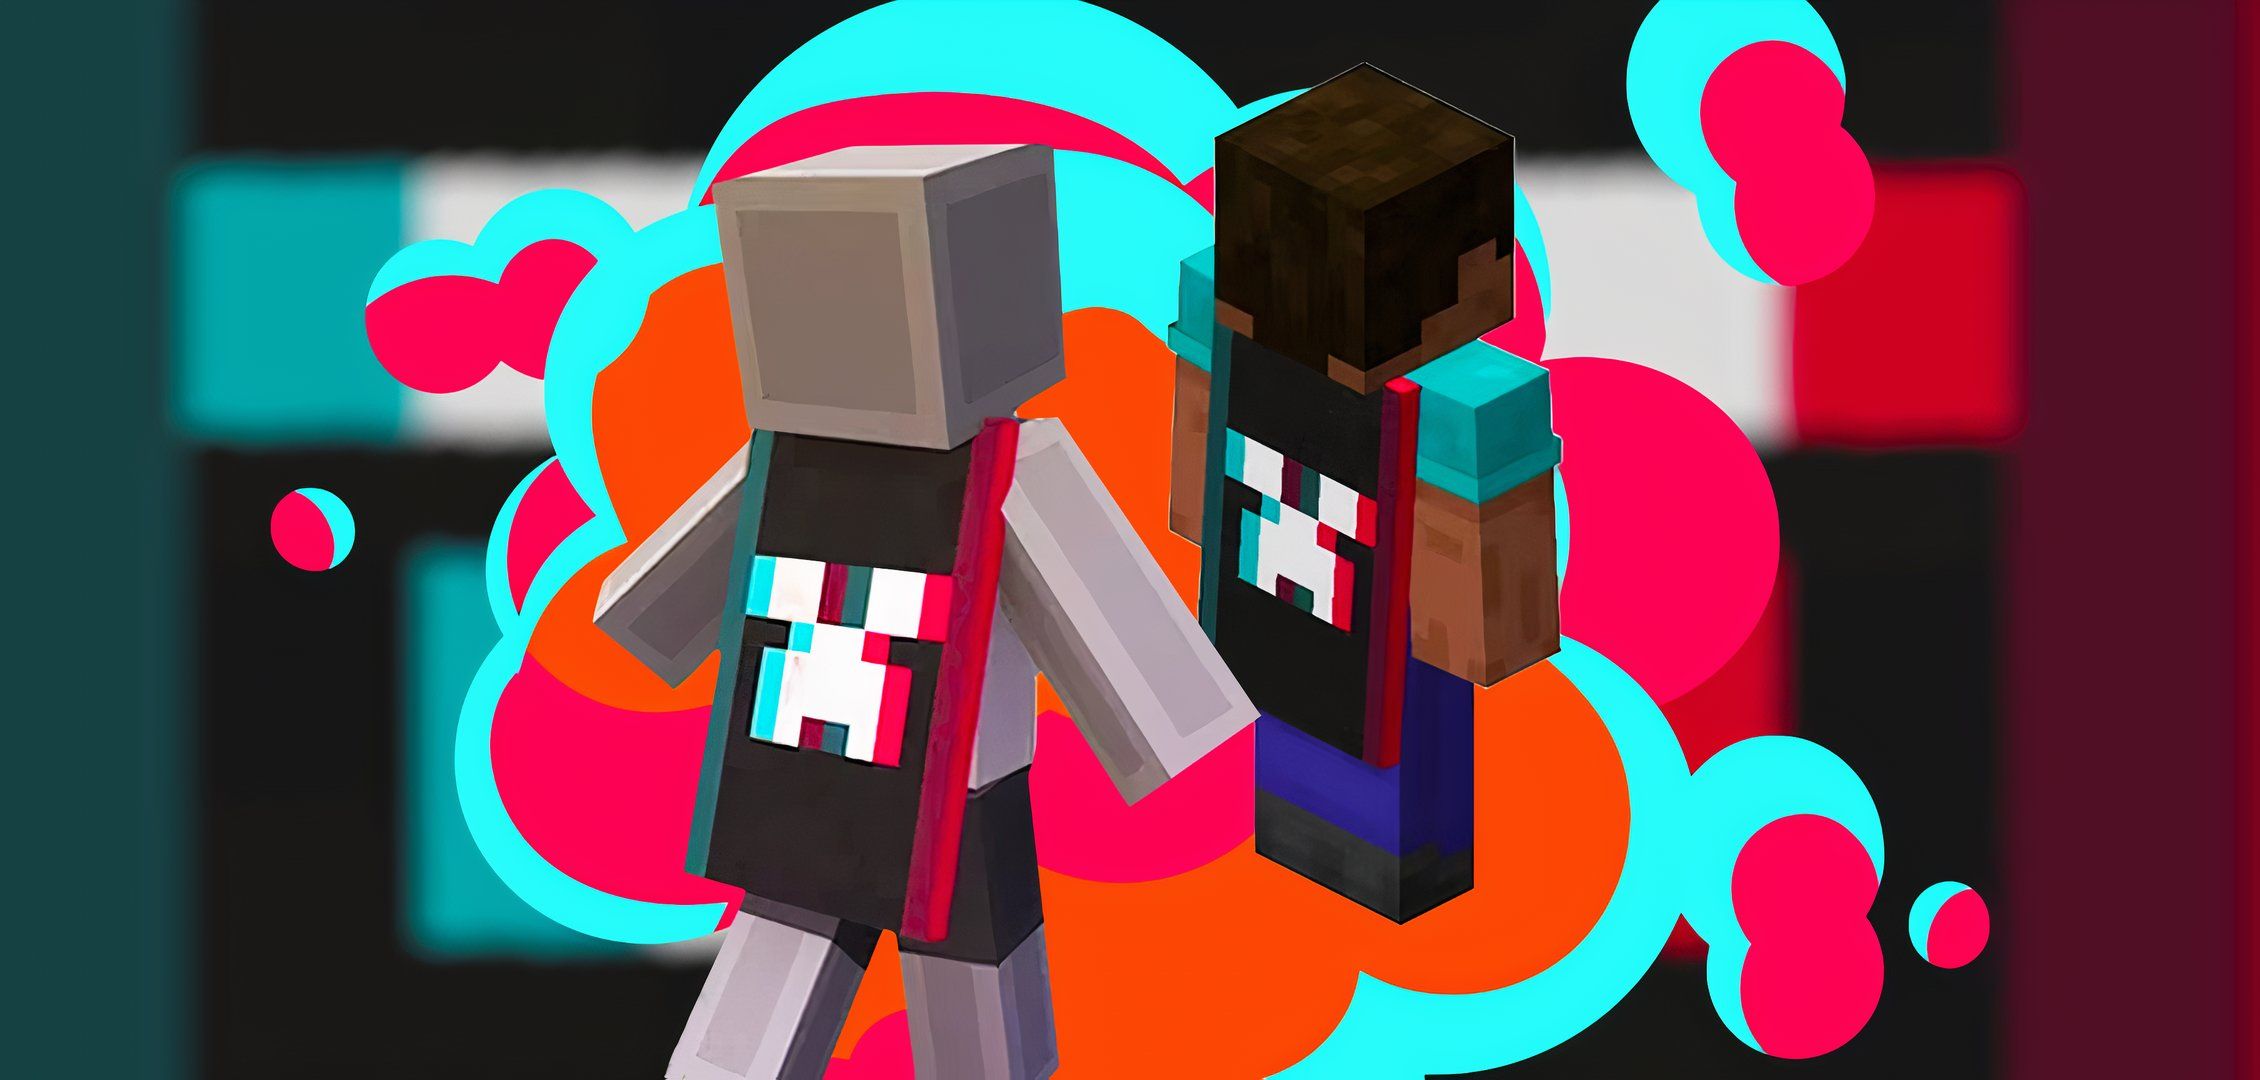 Two Minecraft Characters Wearing The Minecraft 15th Anniversary TikTok Cape Against a Neon Blue, Red And Orange Background